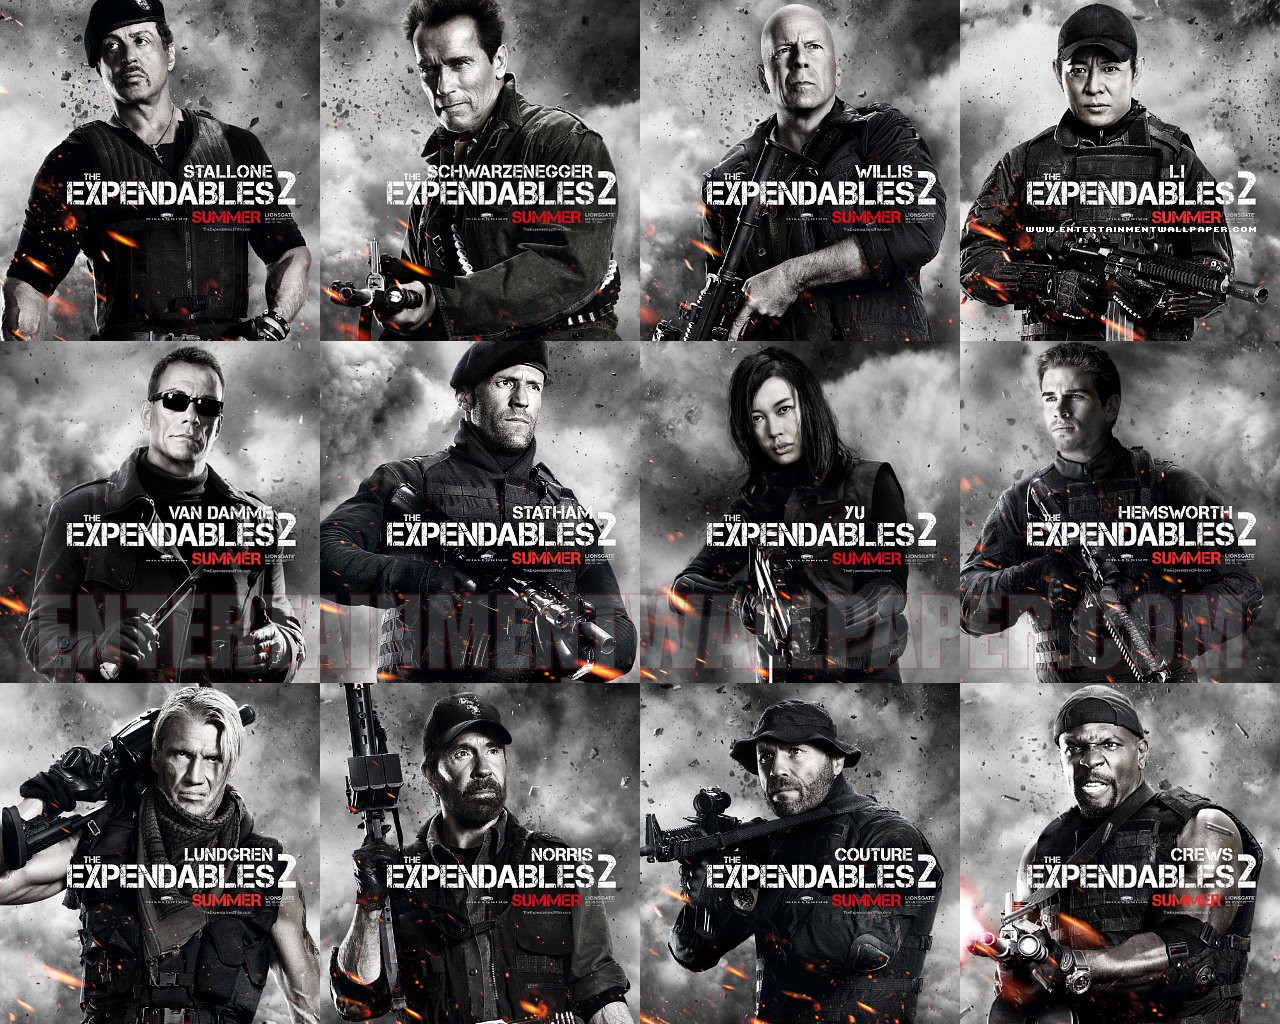 ee60c-the-expendables-2-045b15d